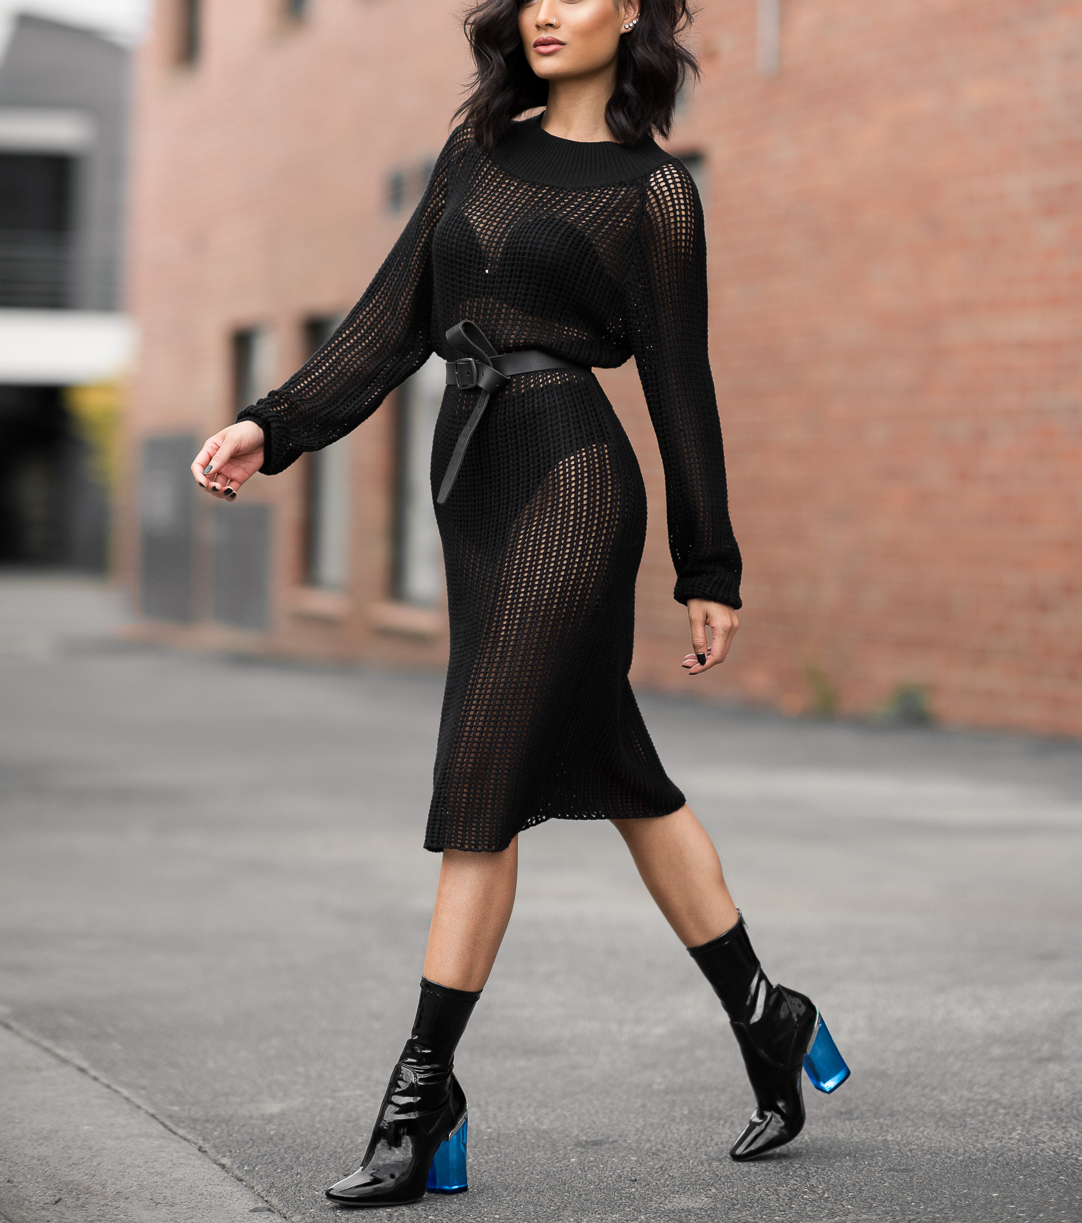 dress with heel boots